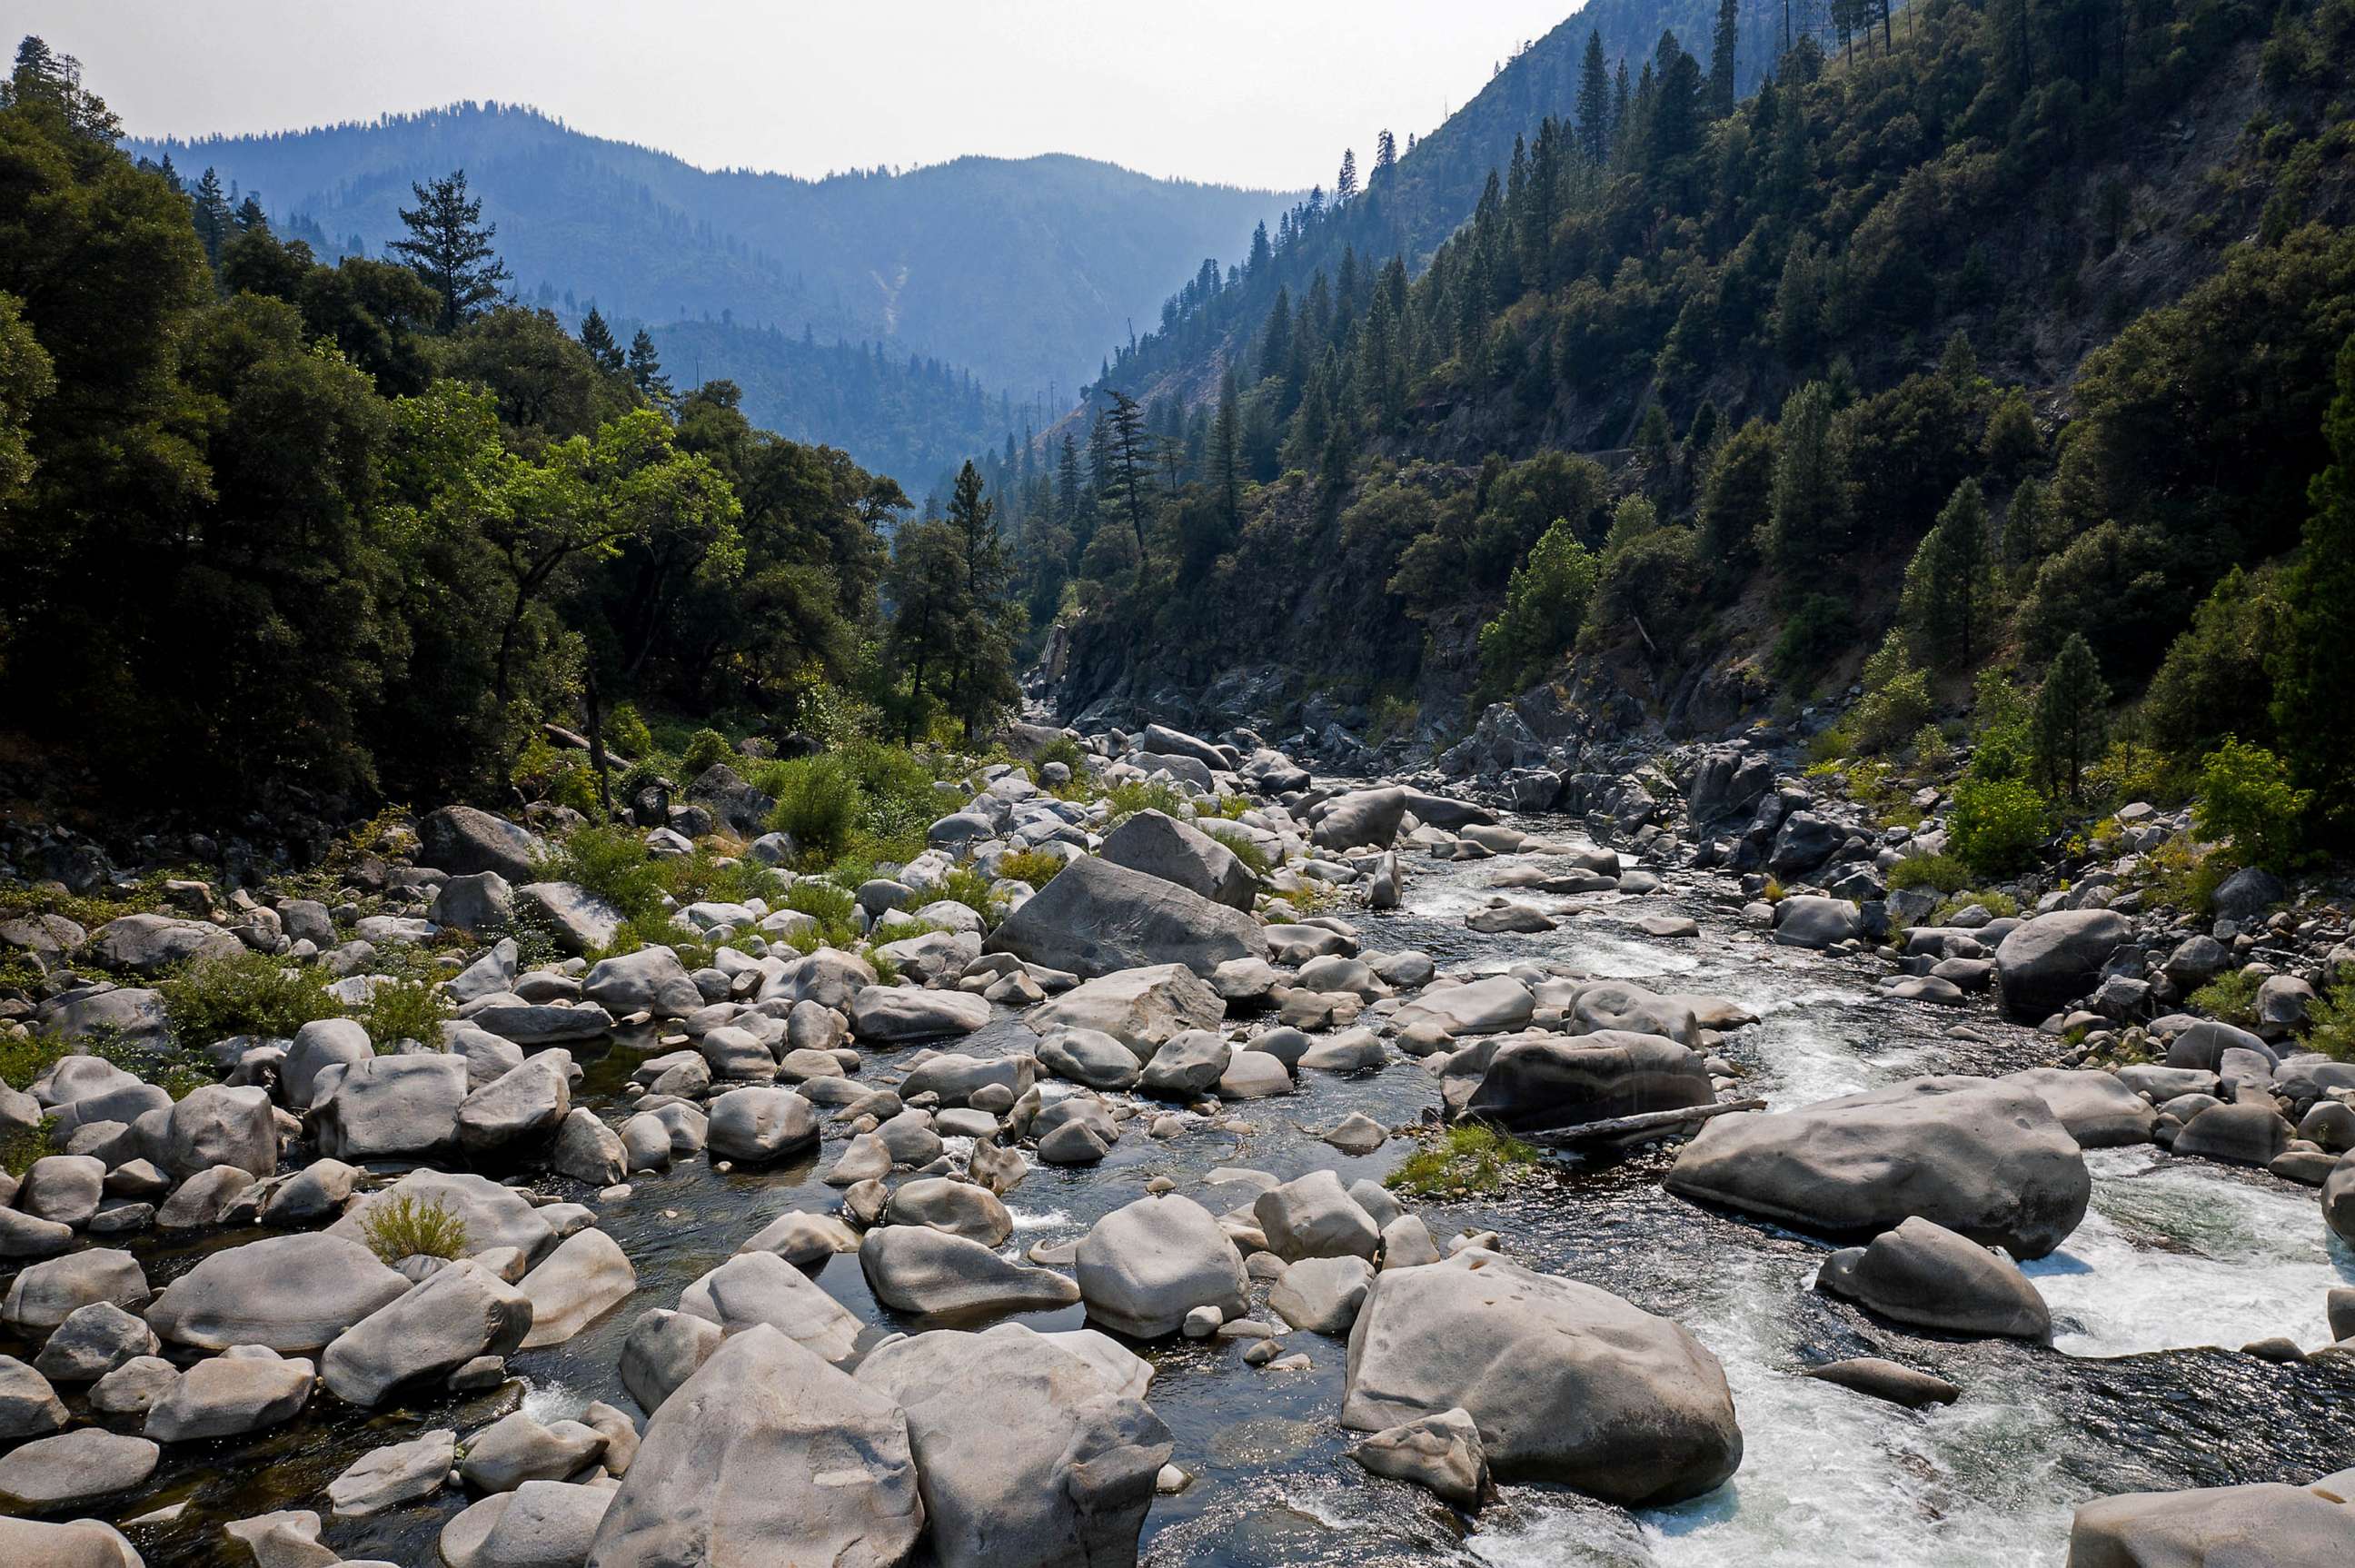 STOCK PHOTO: Feather River flows through a scenic canyon in Northern California' Sierra Nevada Mountains.